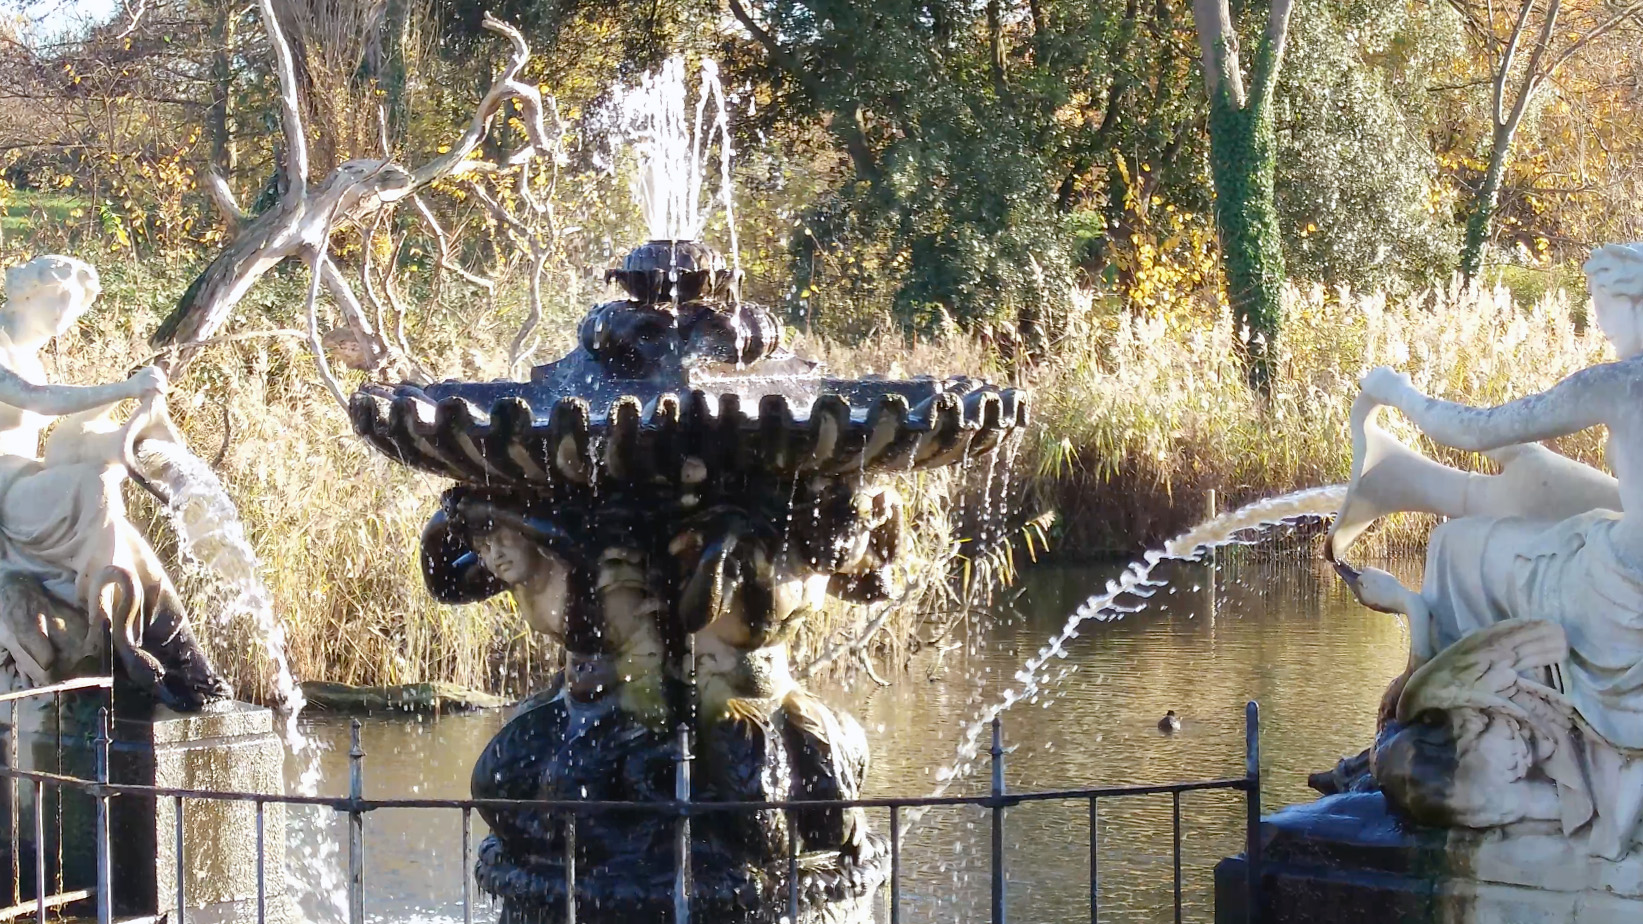 Slow motion capture of fountain in the Italian Garden Kensington, London from This Video Works 2022 showreel